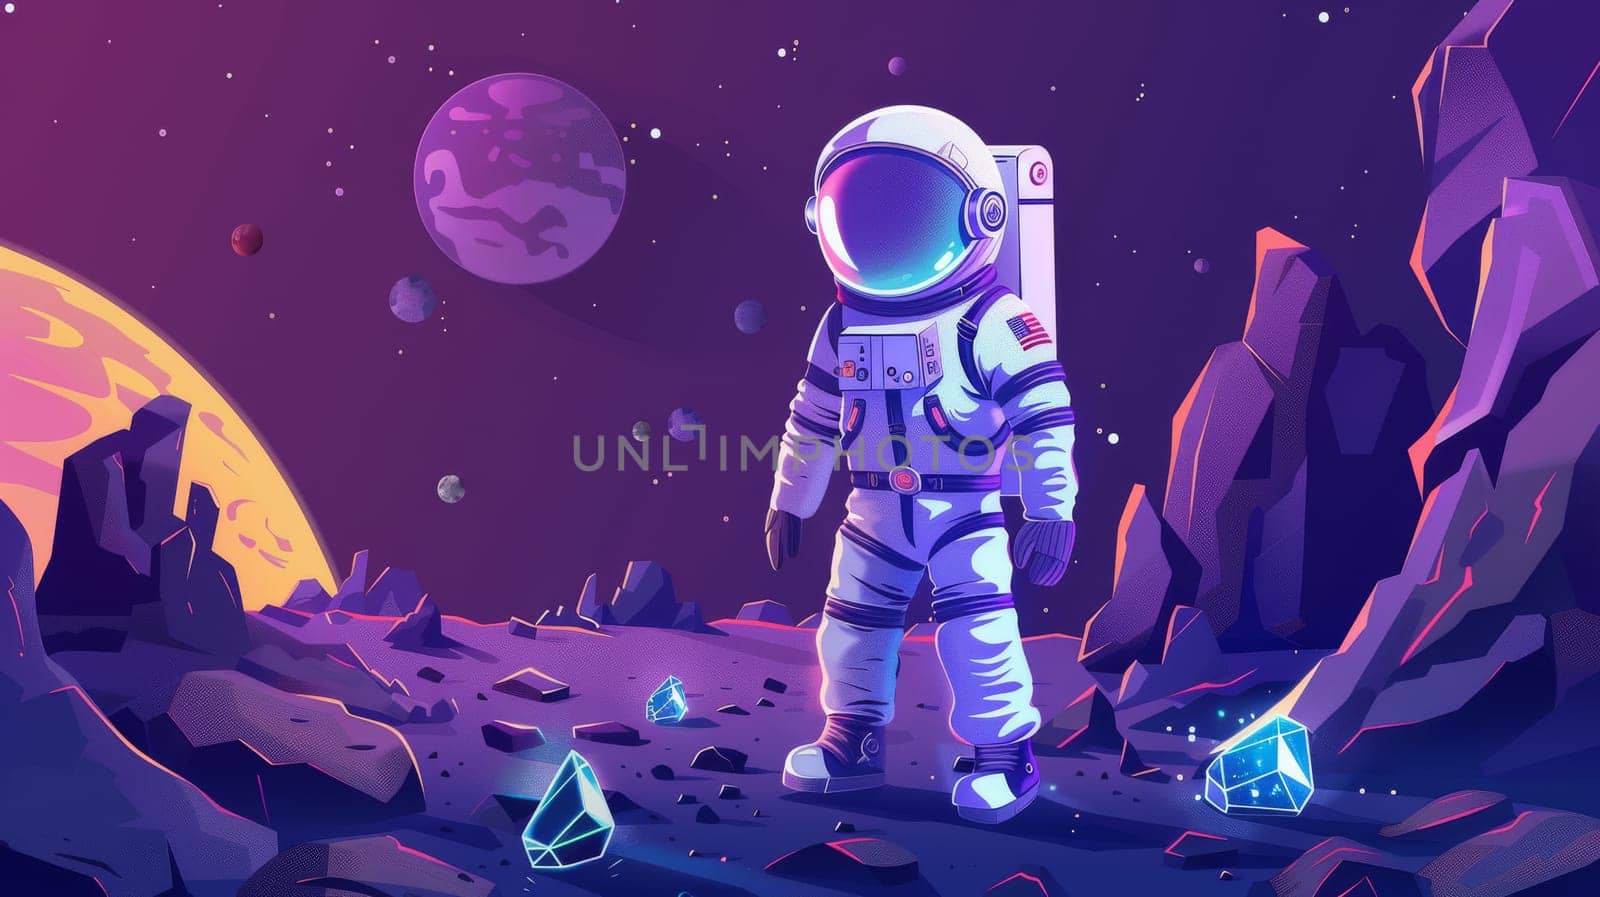 Modern cartoon illustration of astronaut exploring alien planet in far galaxy. Spaceman in suit and helmet on surface of planet with rocks, cracks, and glowing spots.